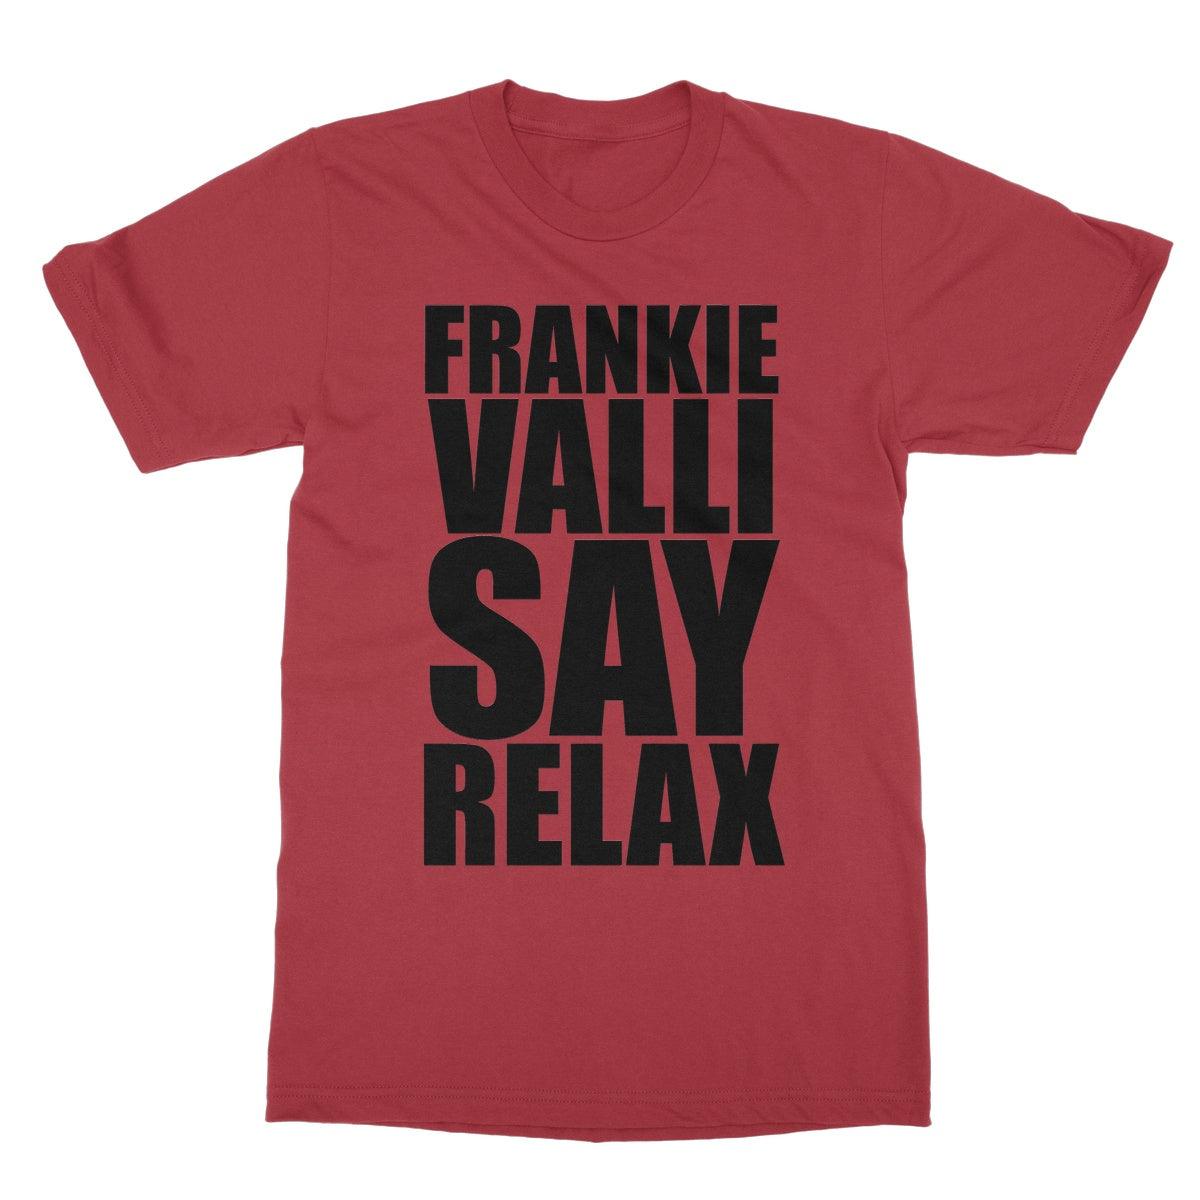 Frankie Valli Say Relax Softstyle T-Shirt | Apparel Cherry Red